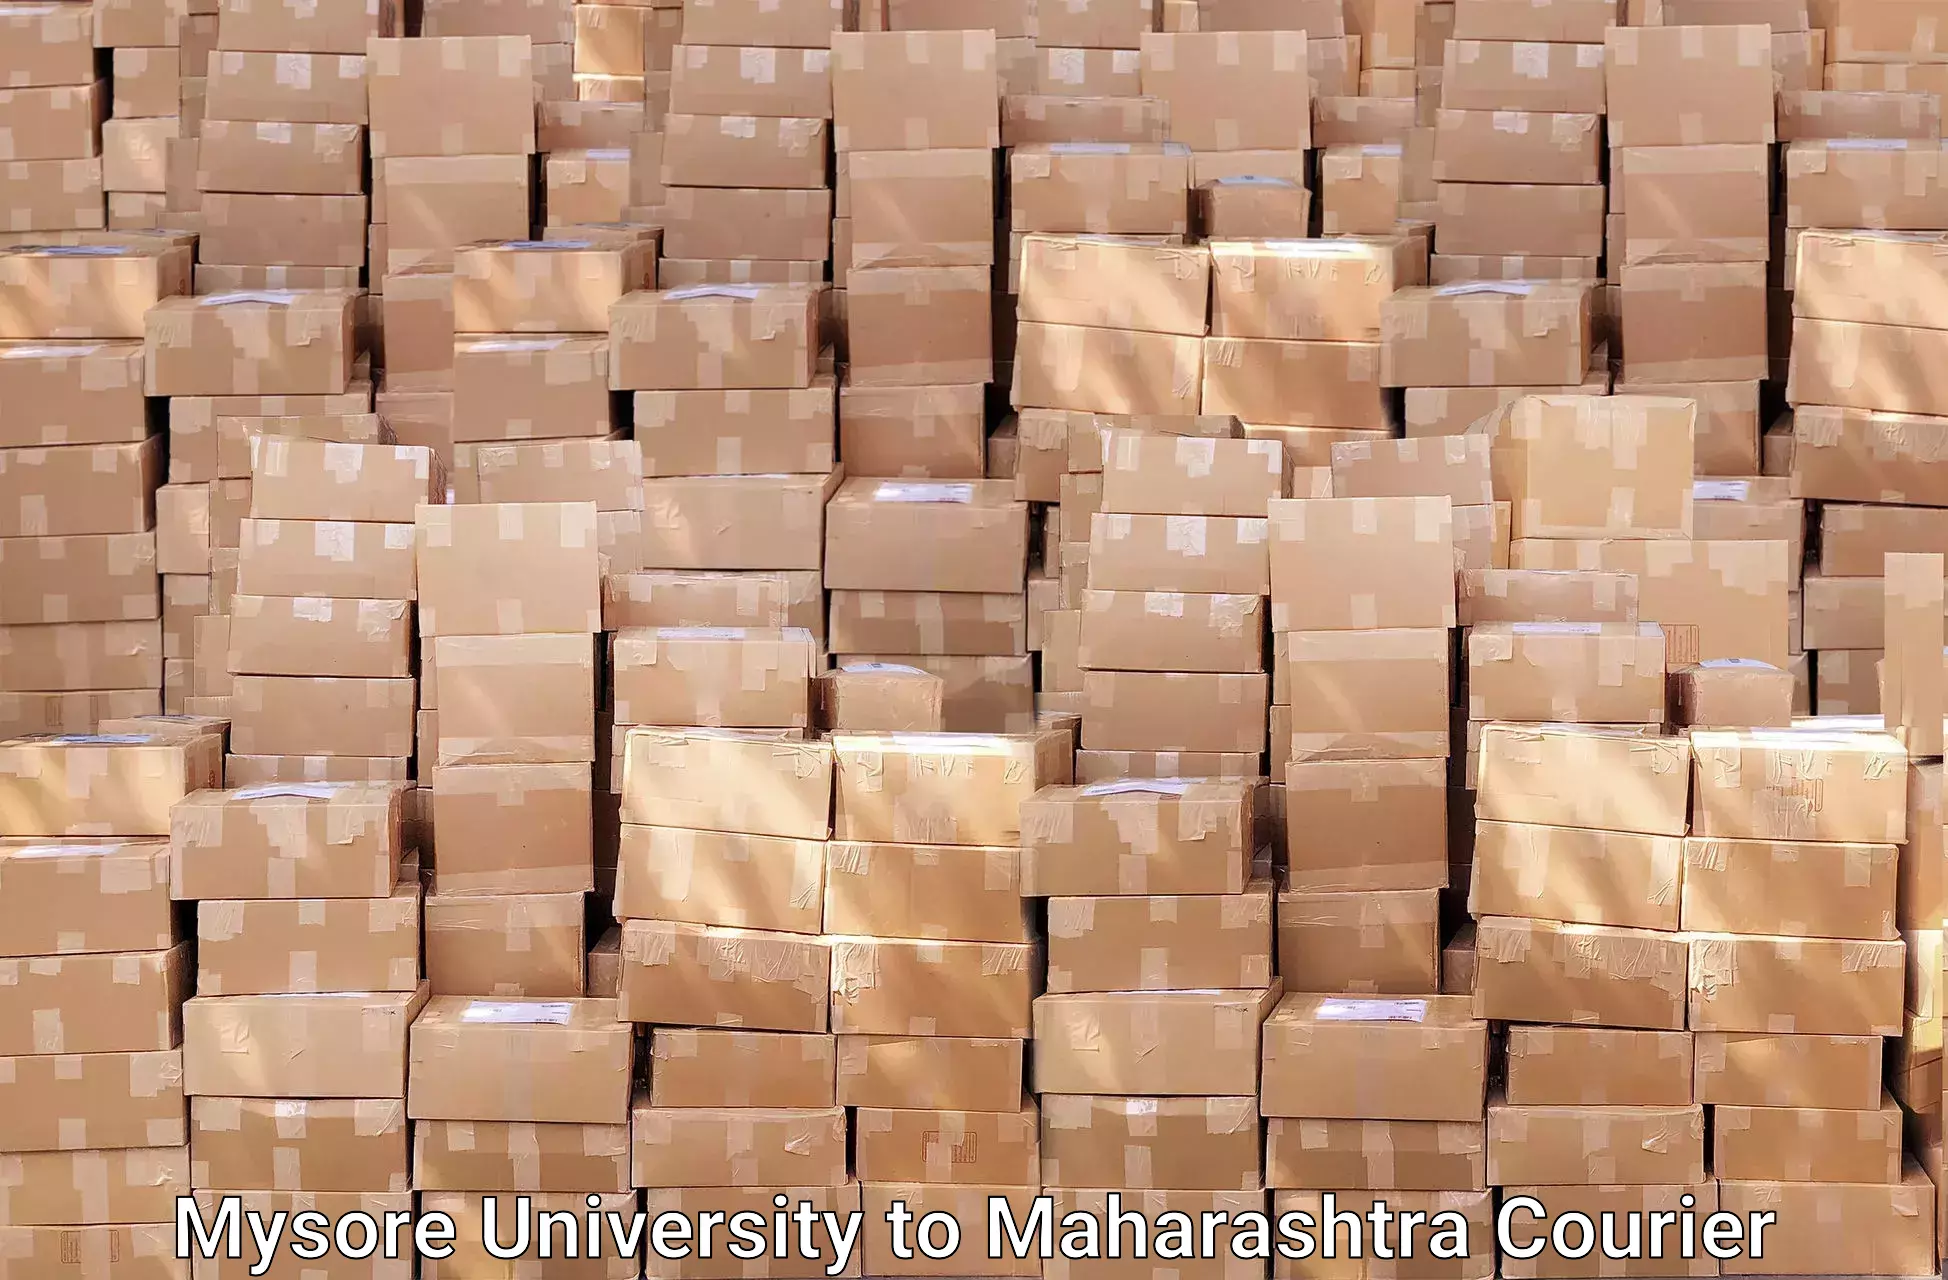 Packing and moving services in Mysore University to Maharashtra